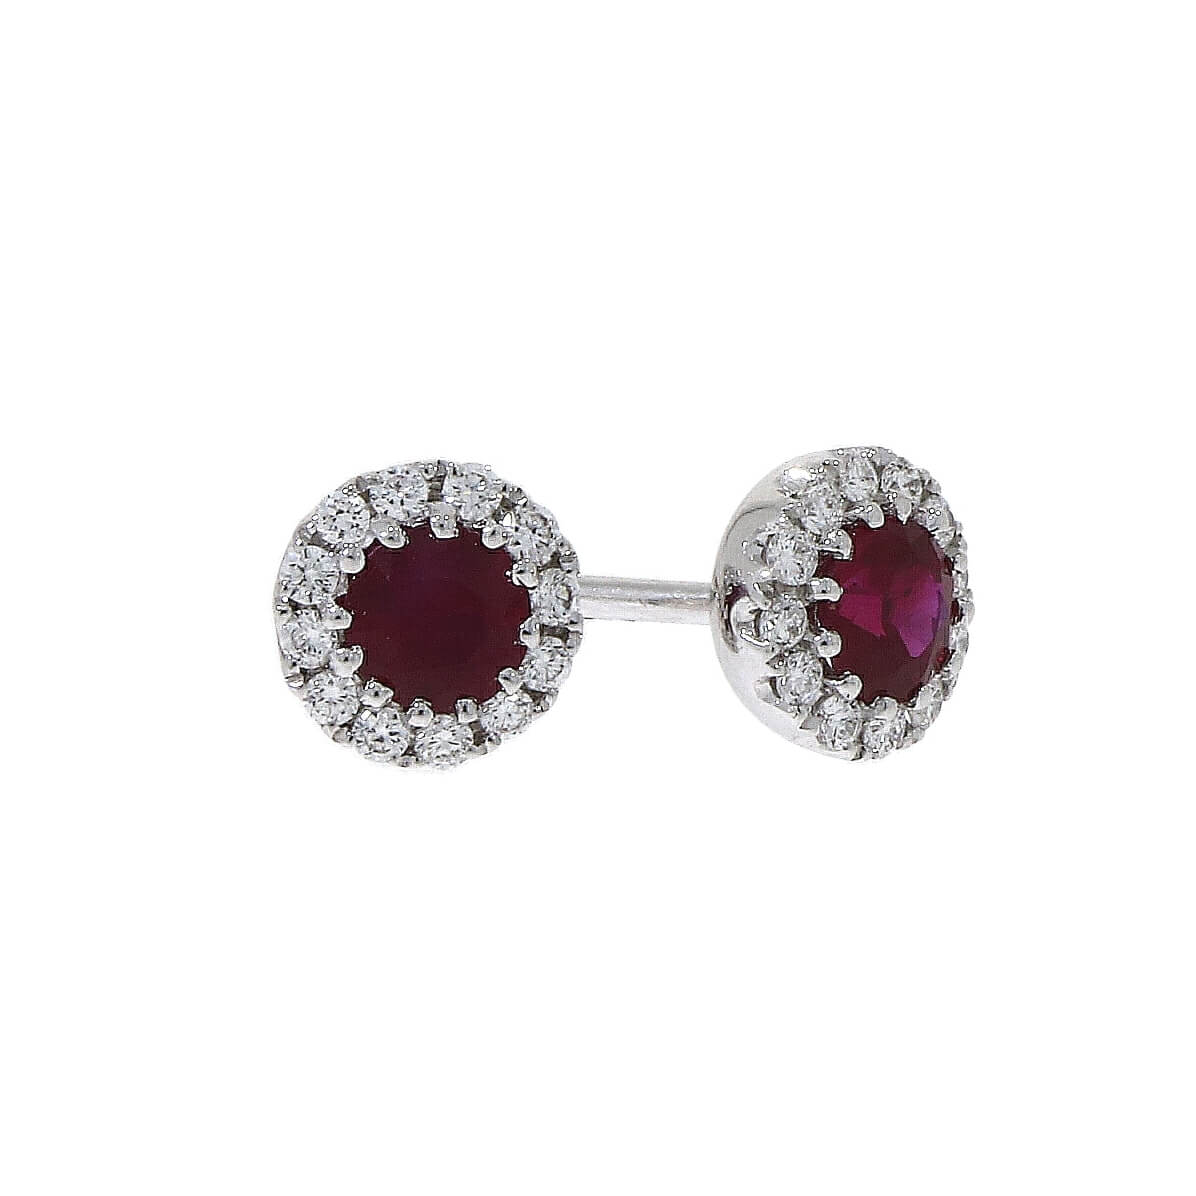 18ct white gold diamond and ruby cluster earrings 36845f8